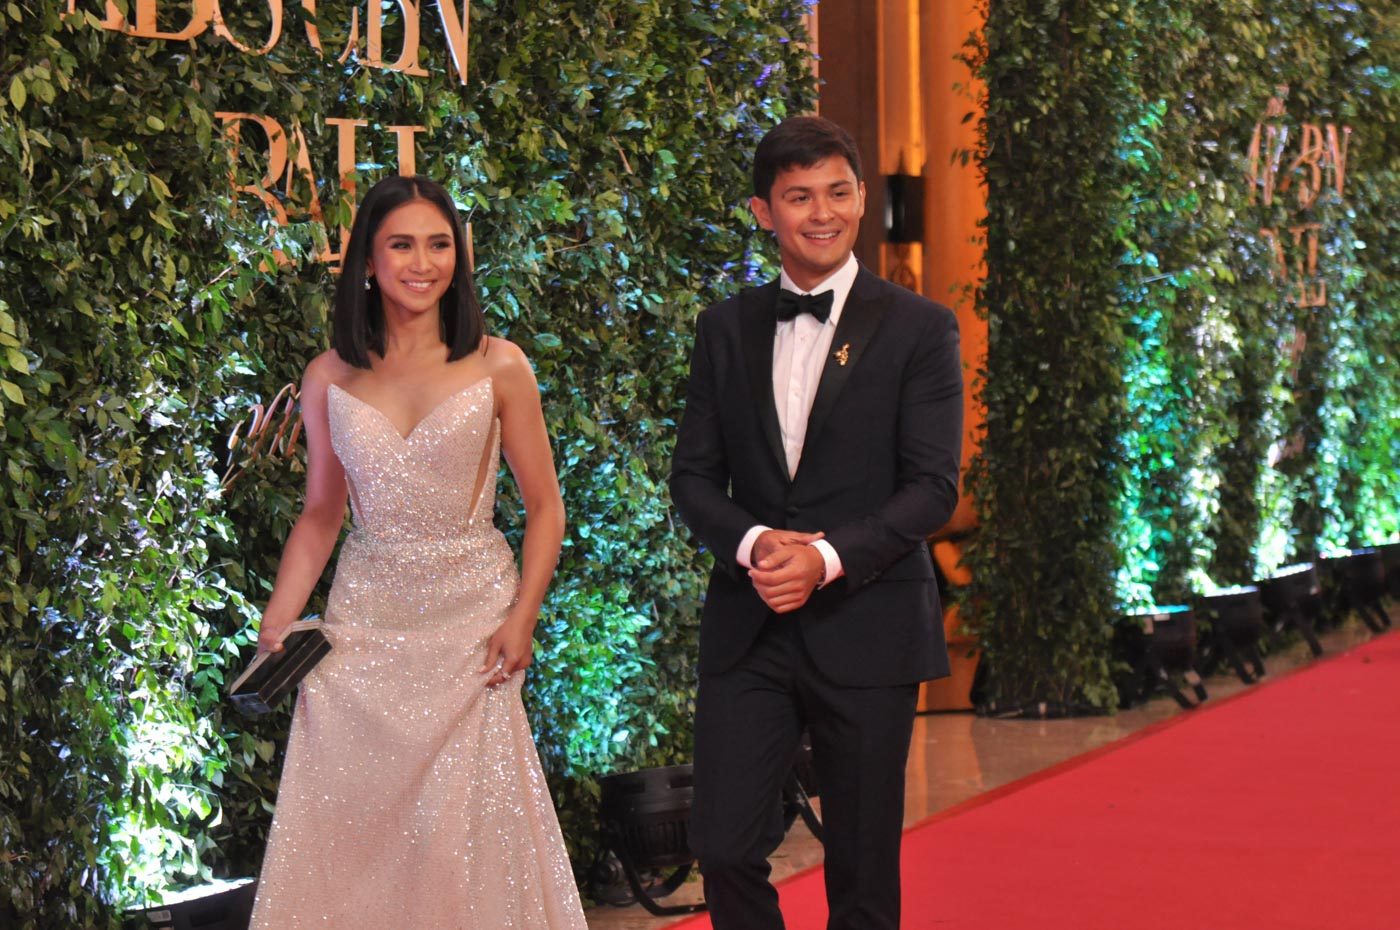 NIGHT AT THE BALL. The couple walk the red carpet at the 2018 ABS-CBN Ball. File photo by Jay Ganzon/Rappler 